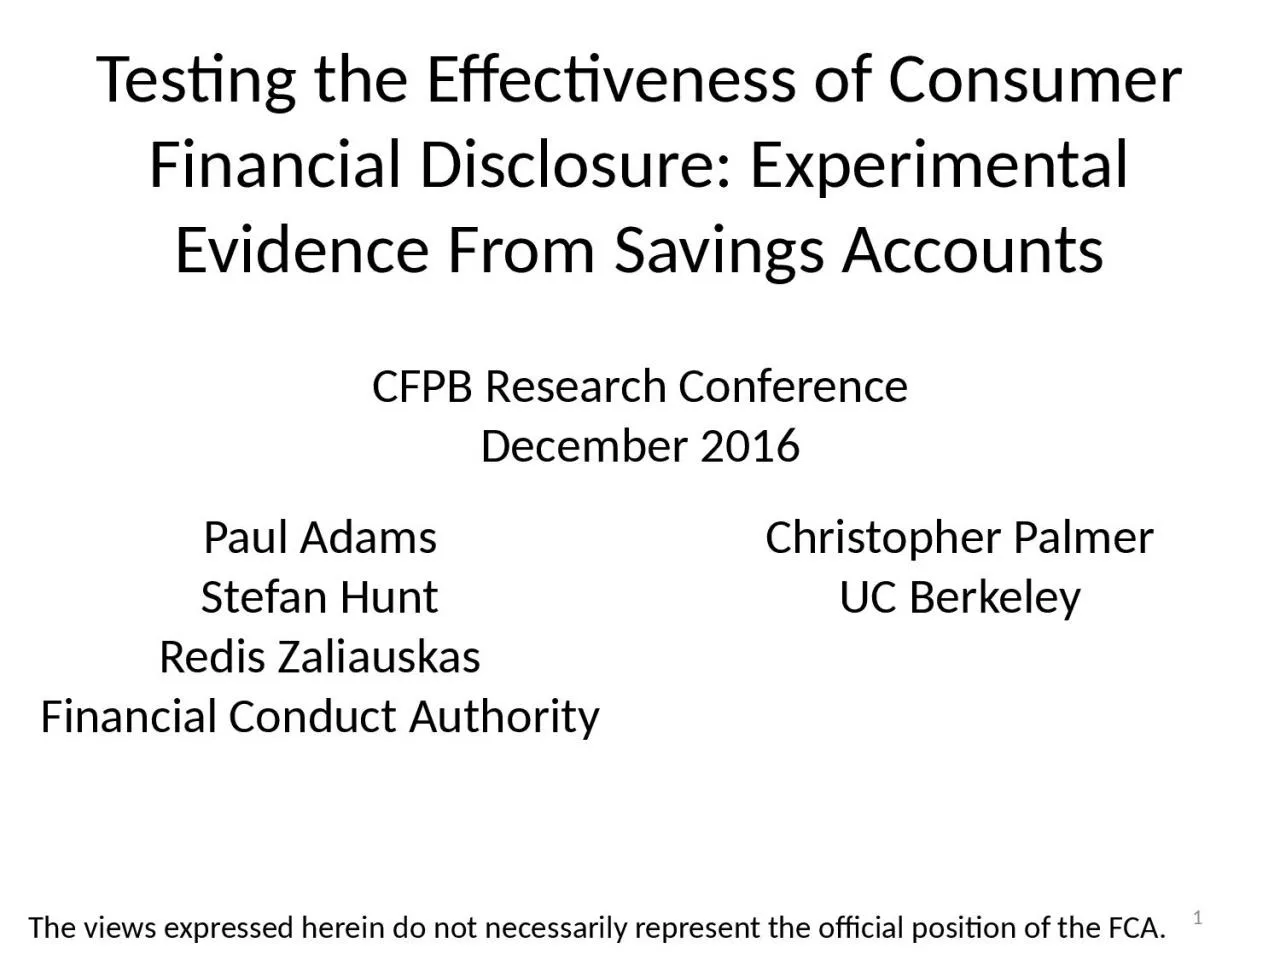 Testing the Effectiveness of Consumer Financial Disclosure: Experimental Evidence From